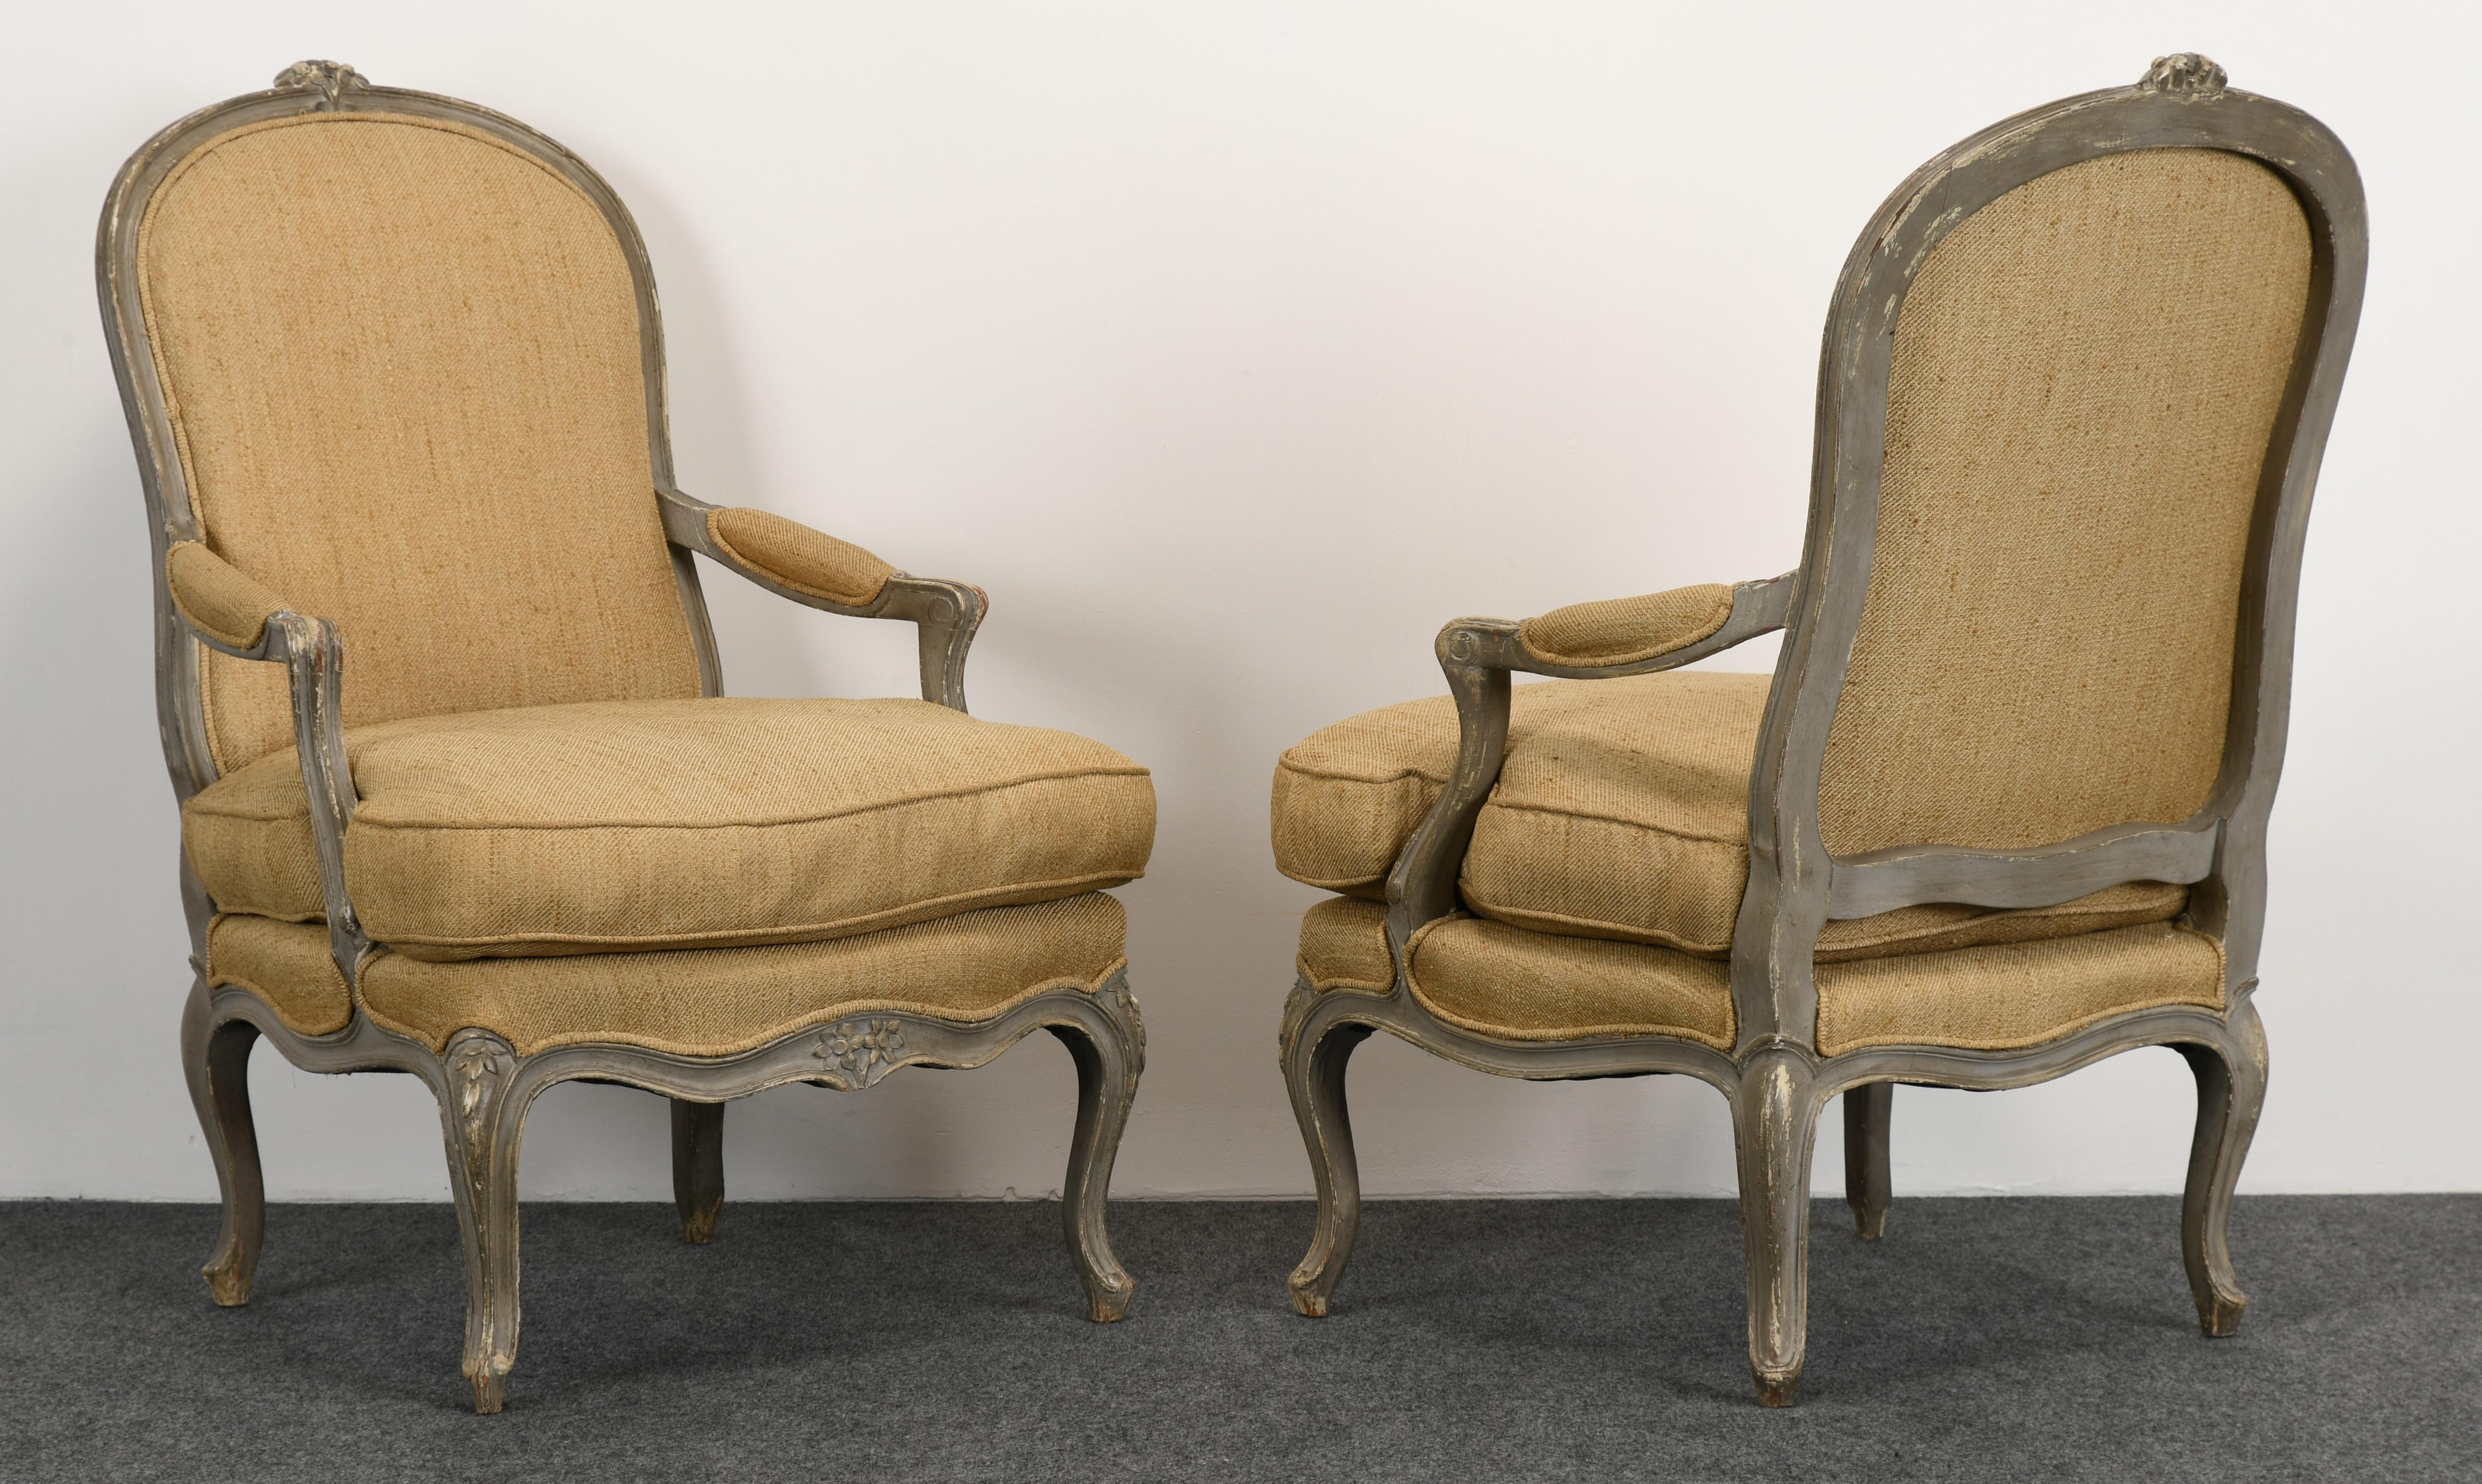 A wonderful large scale pair of painted Louis XV style chairs with Gustavian grey finish. Newer upholstery, however, some spots to the underside of cushions. Great patina with a distressed painted finish. Frames are structurally sound with cushion